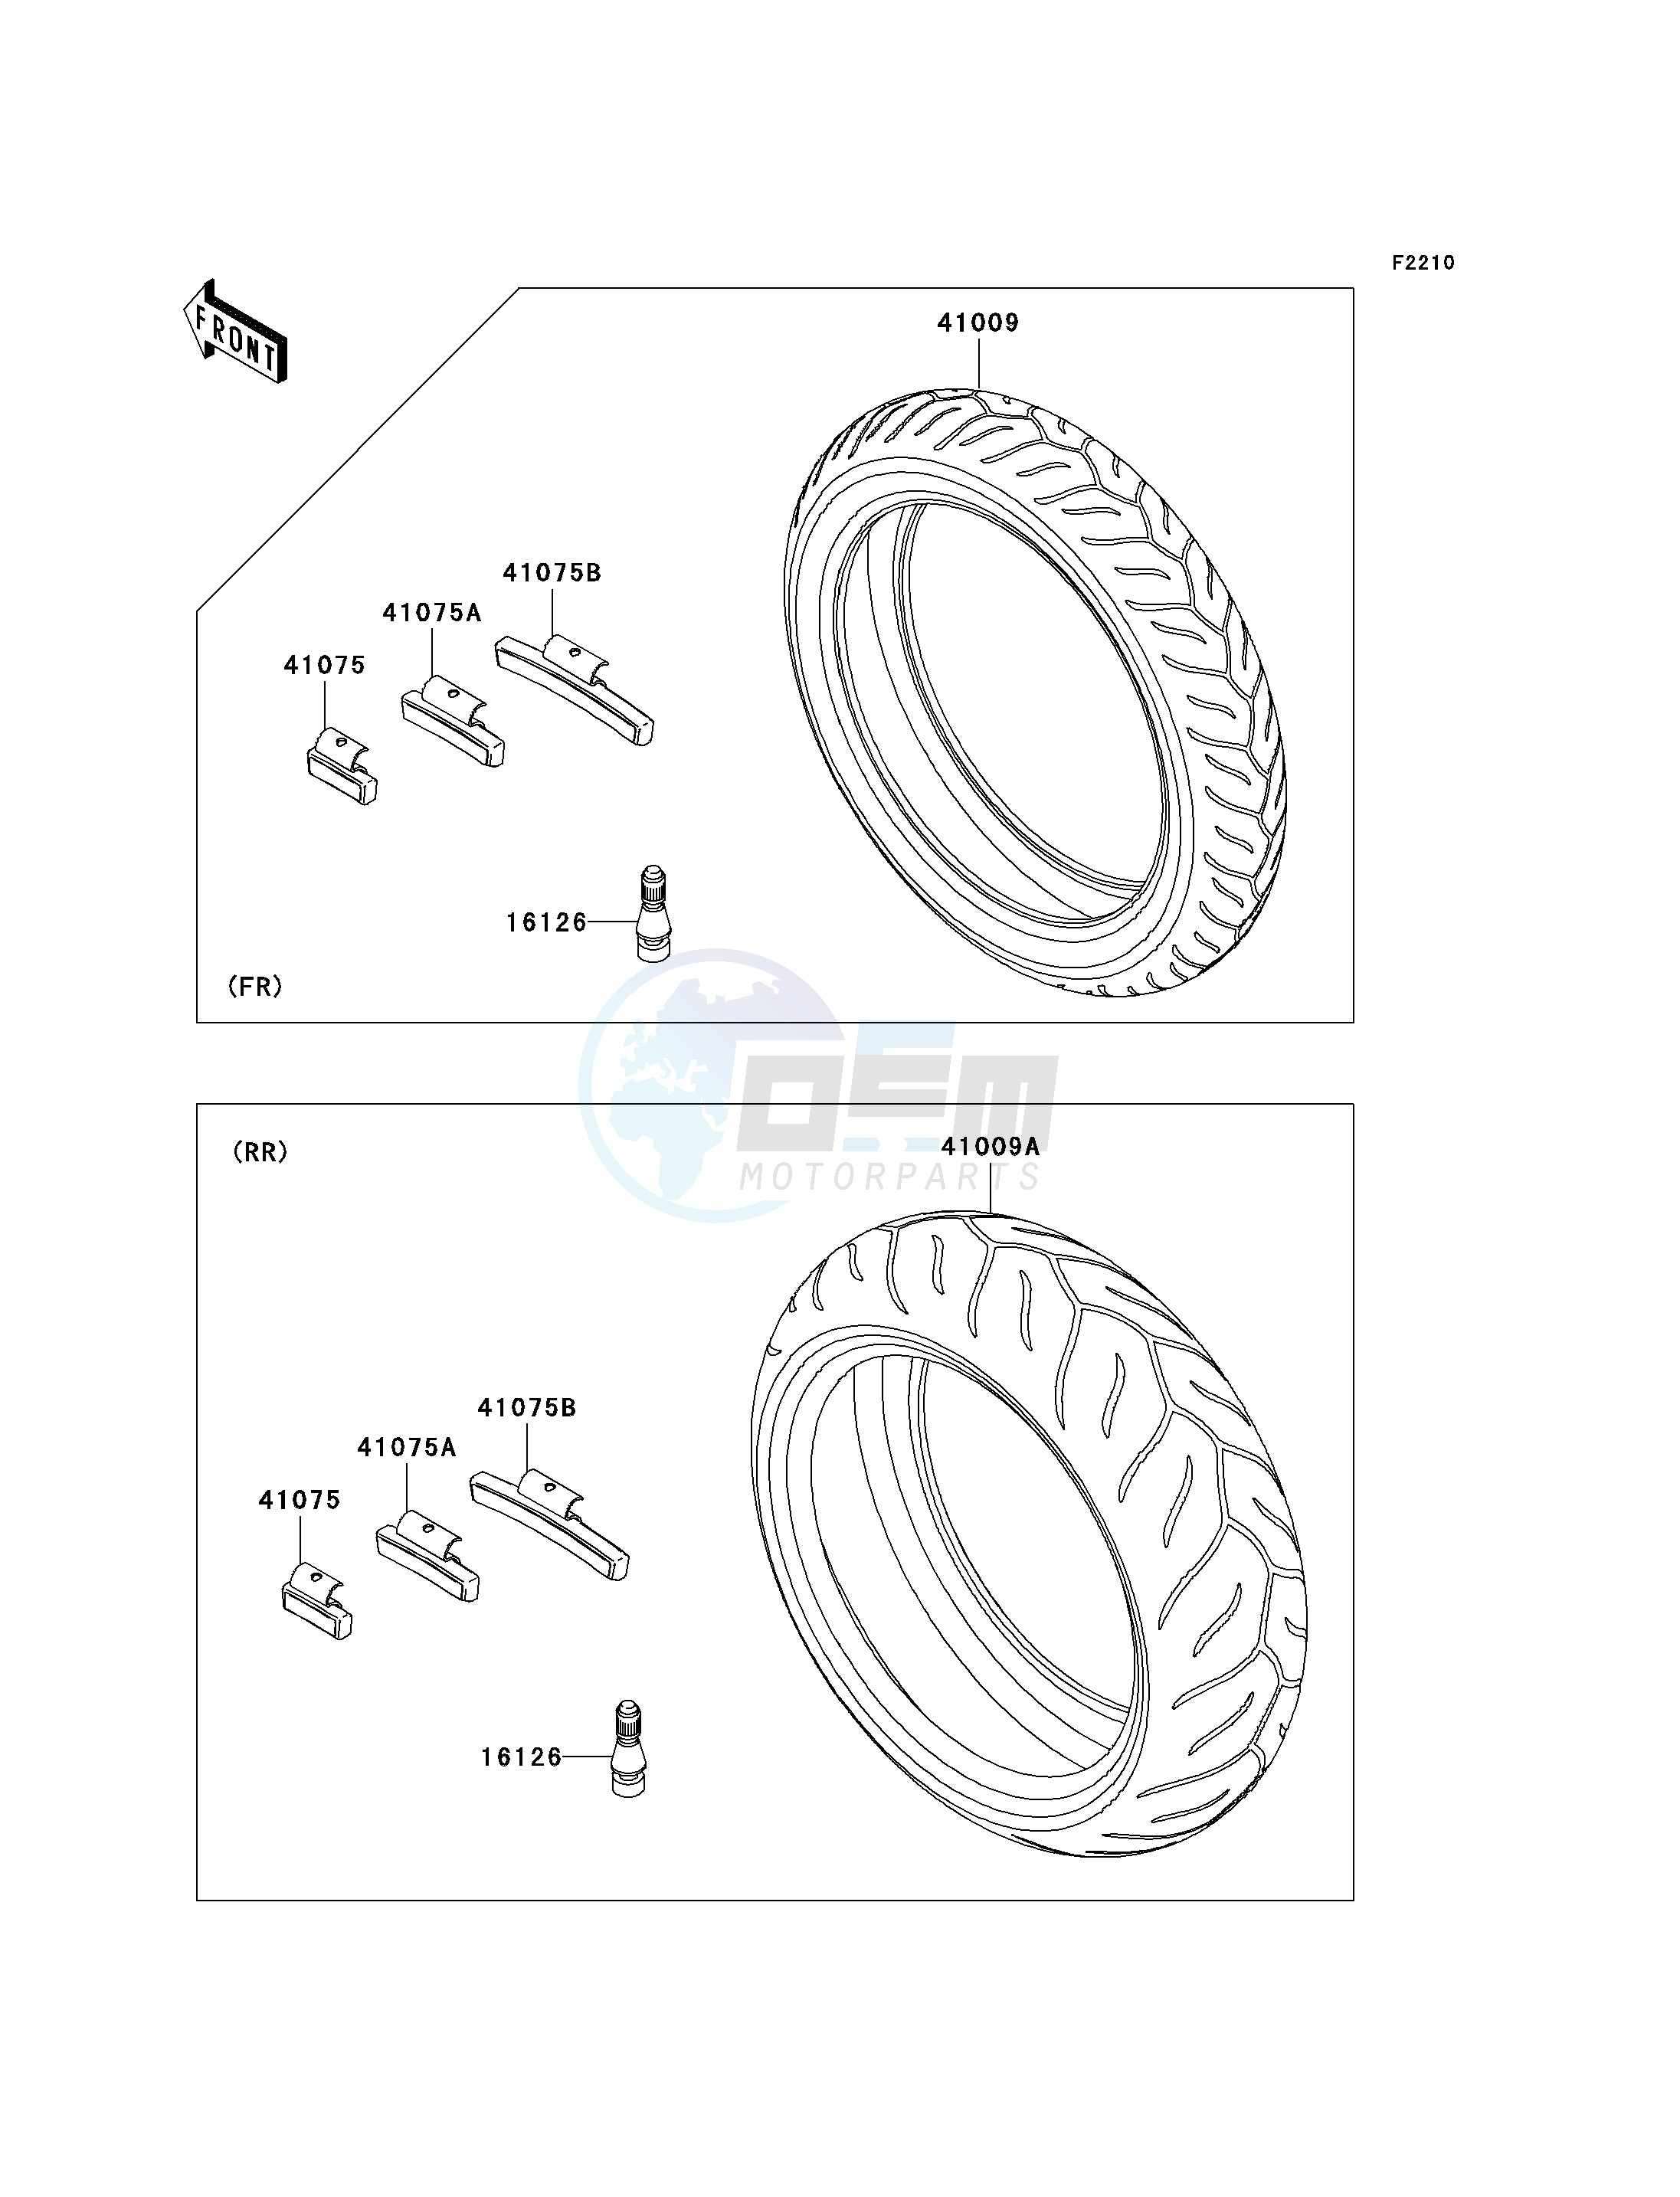 TIRES image